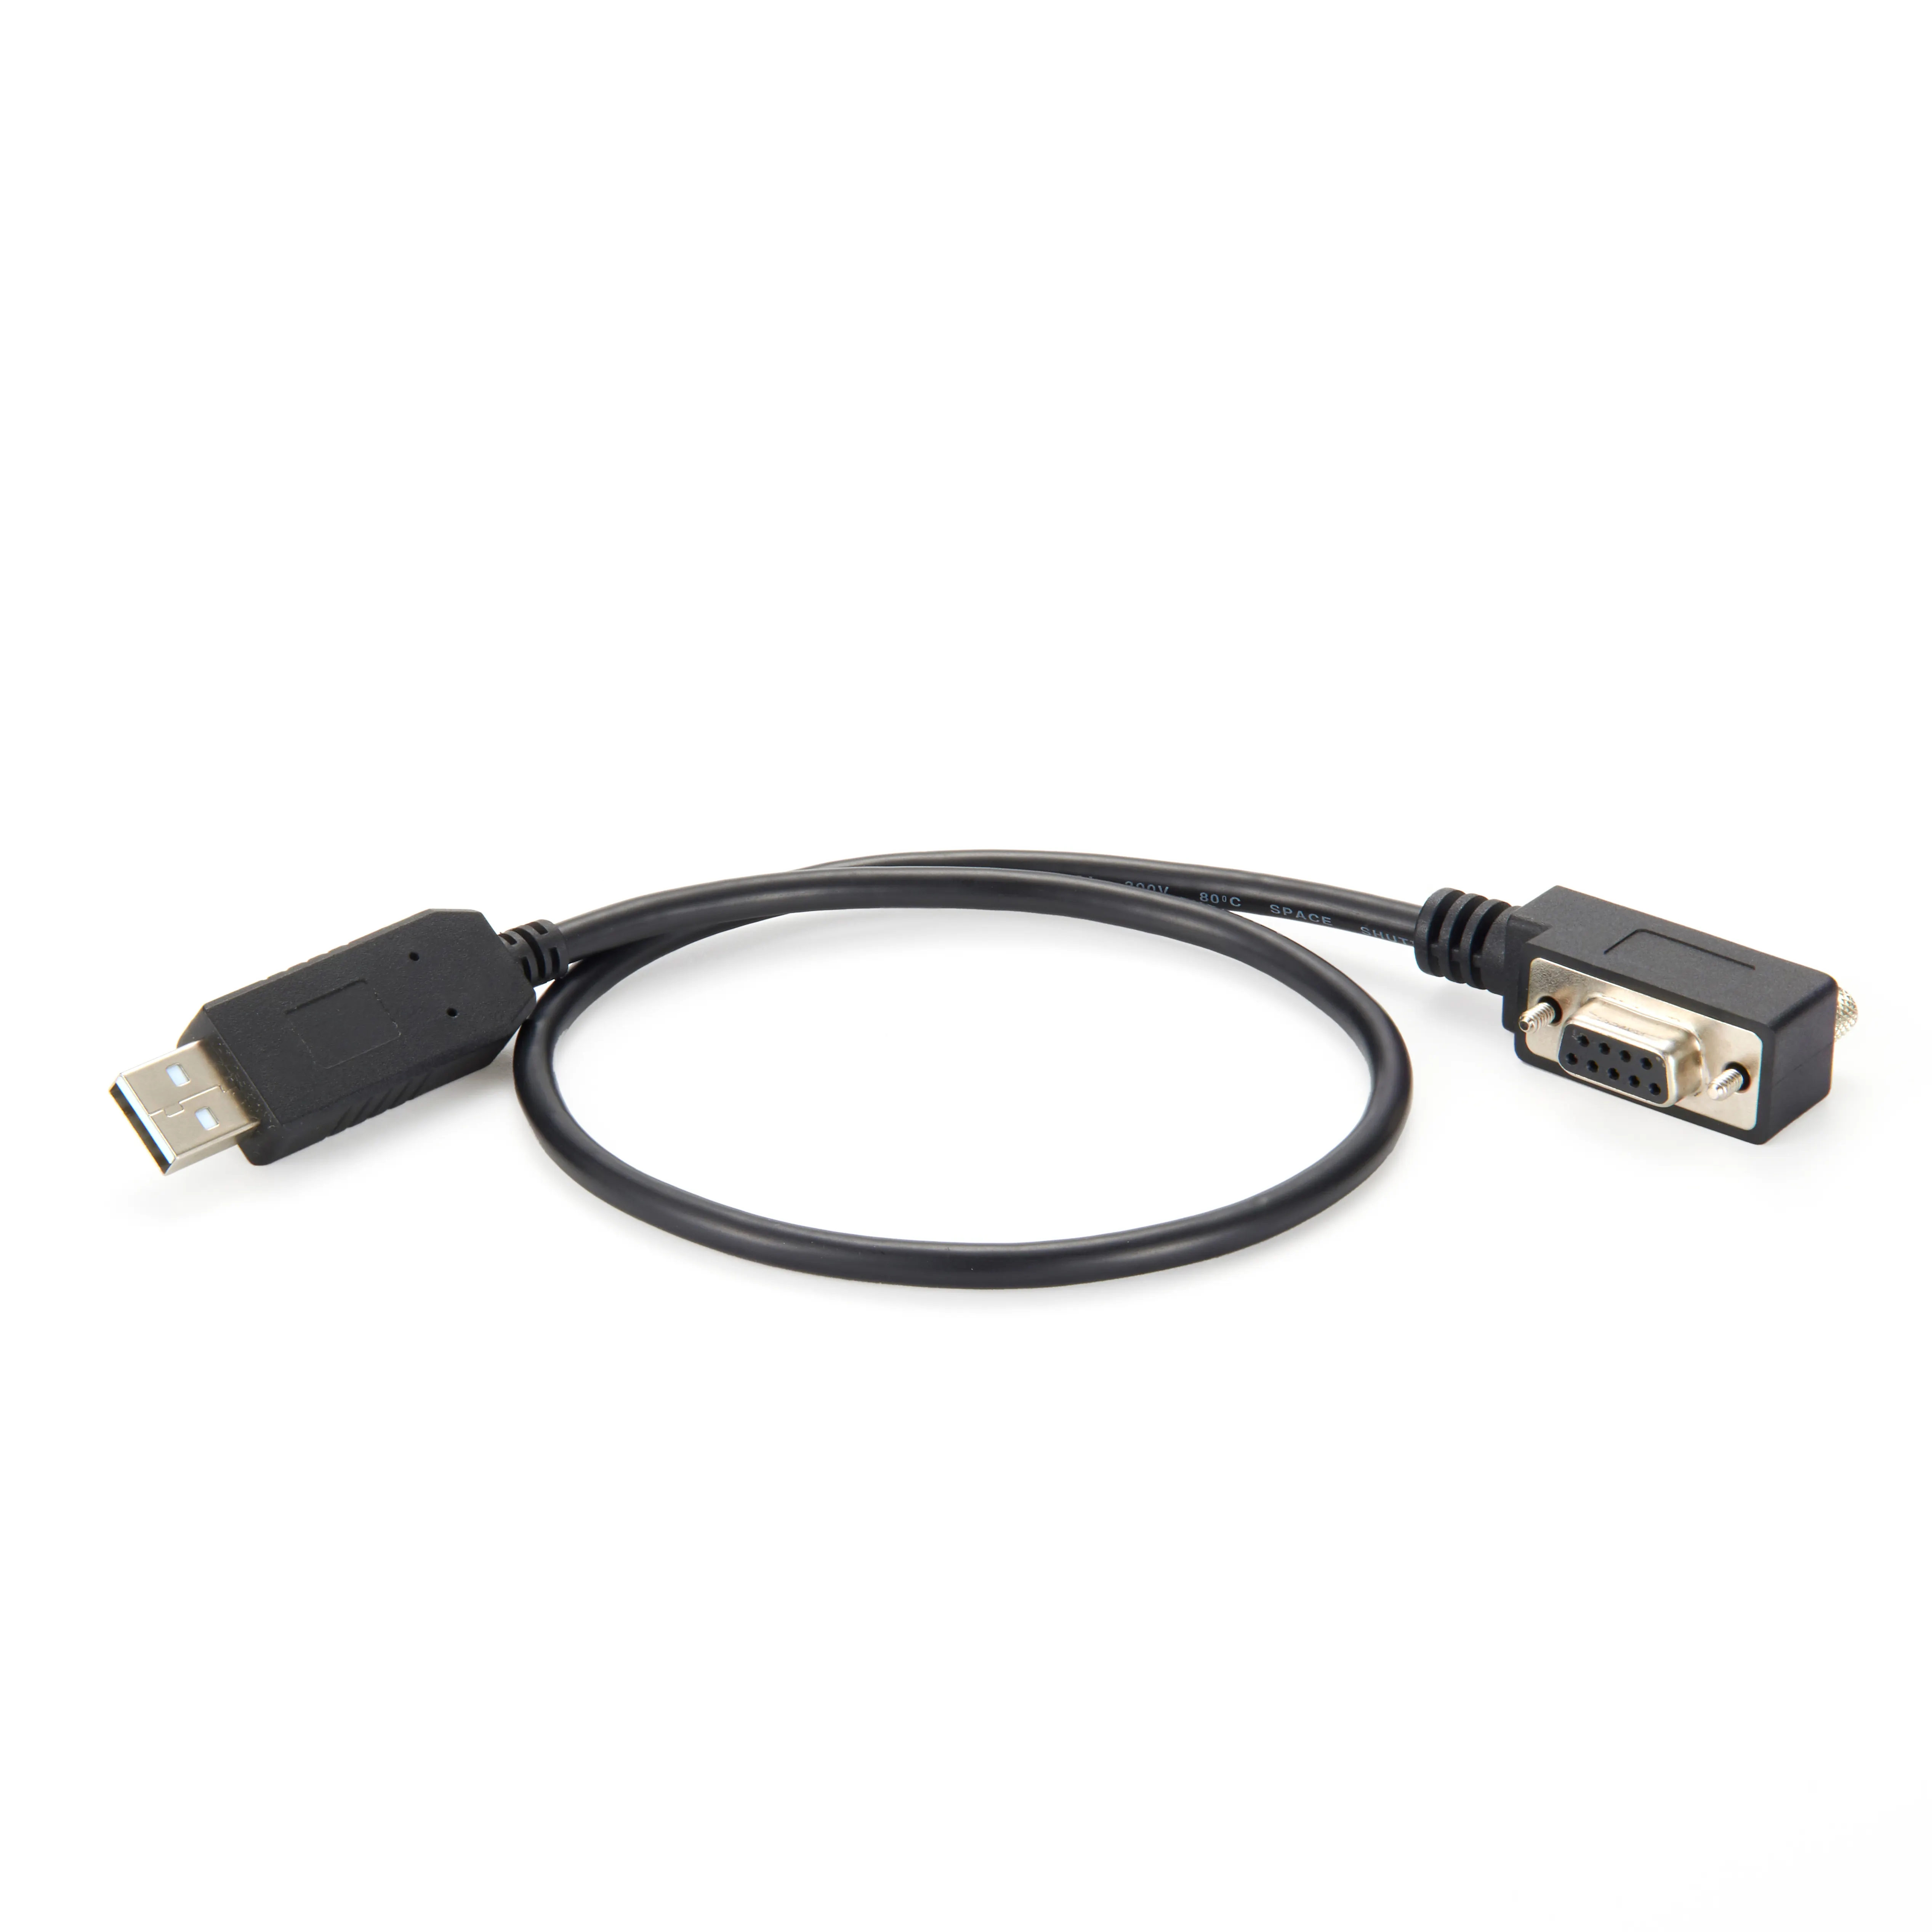 USB to RS-422/485 Adapter Low Profile db9/ USB to RS232 DB9 90 degree Serial Adapter Cable